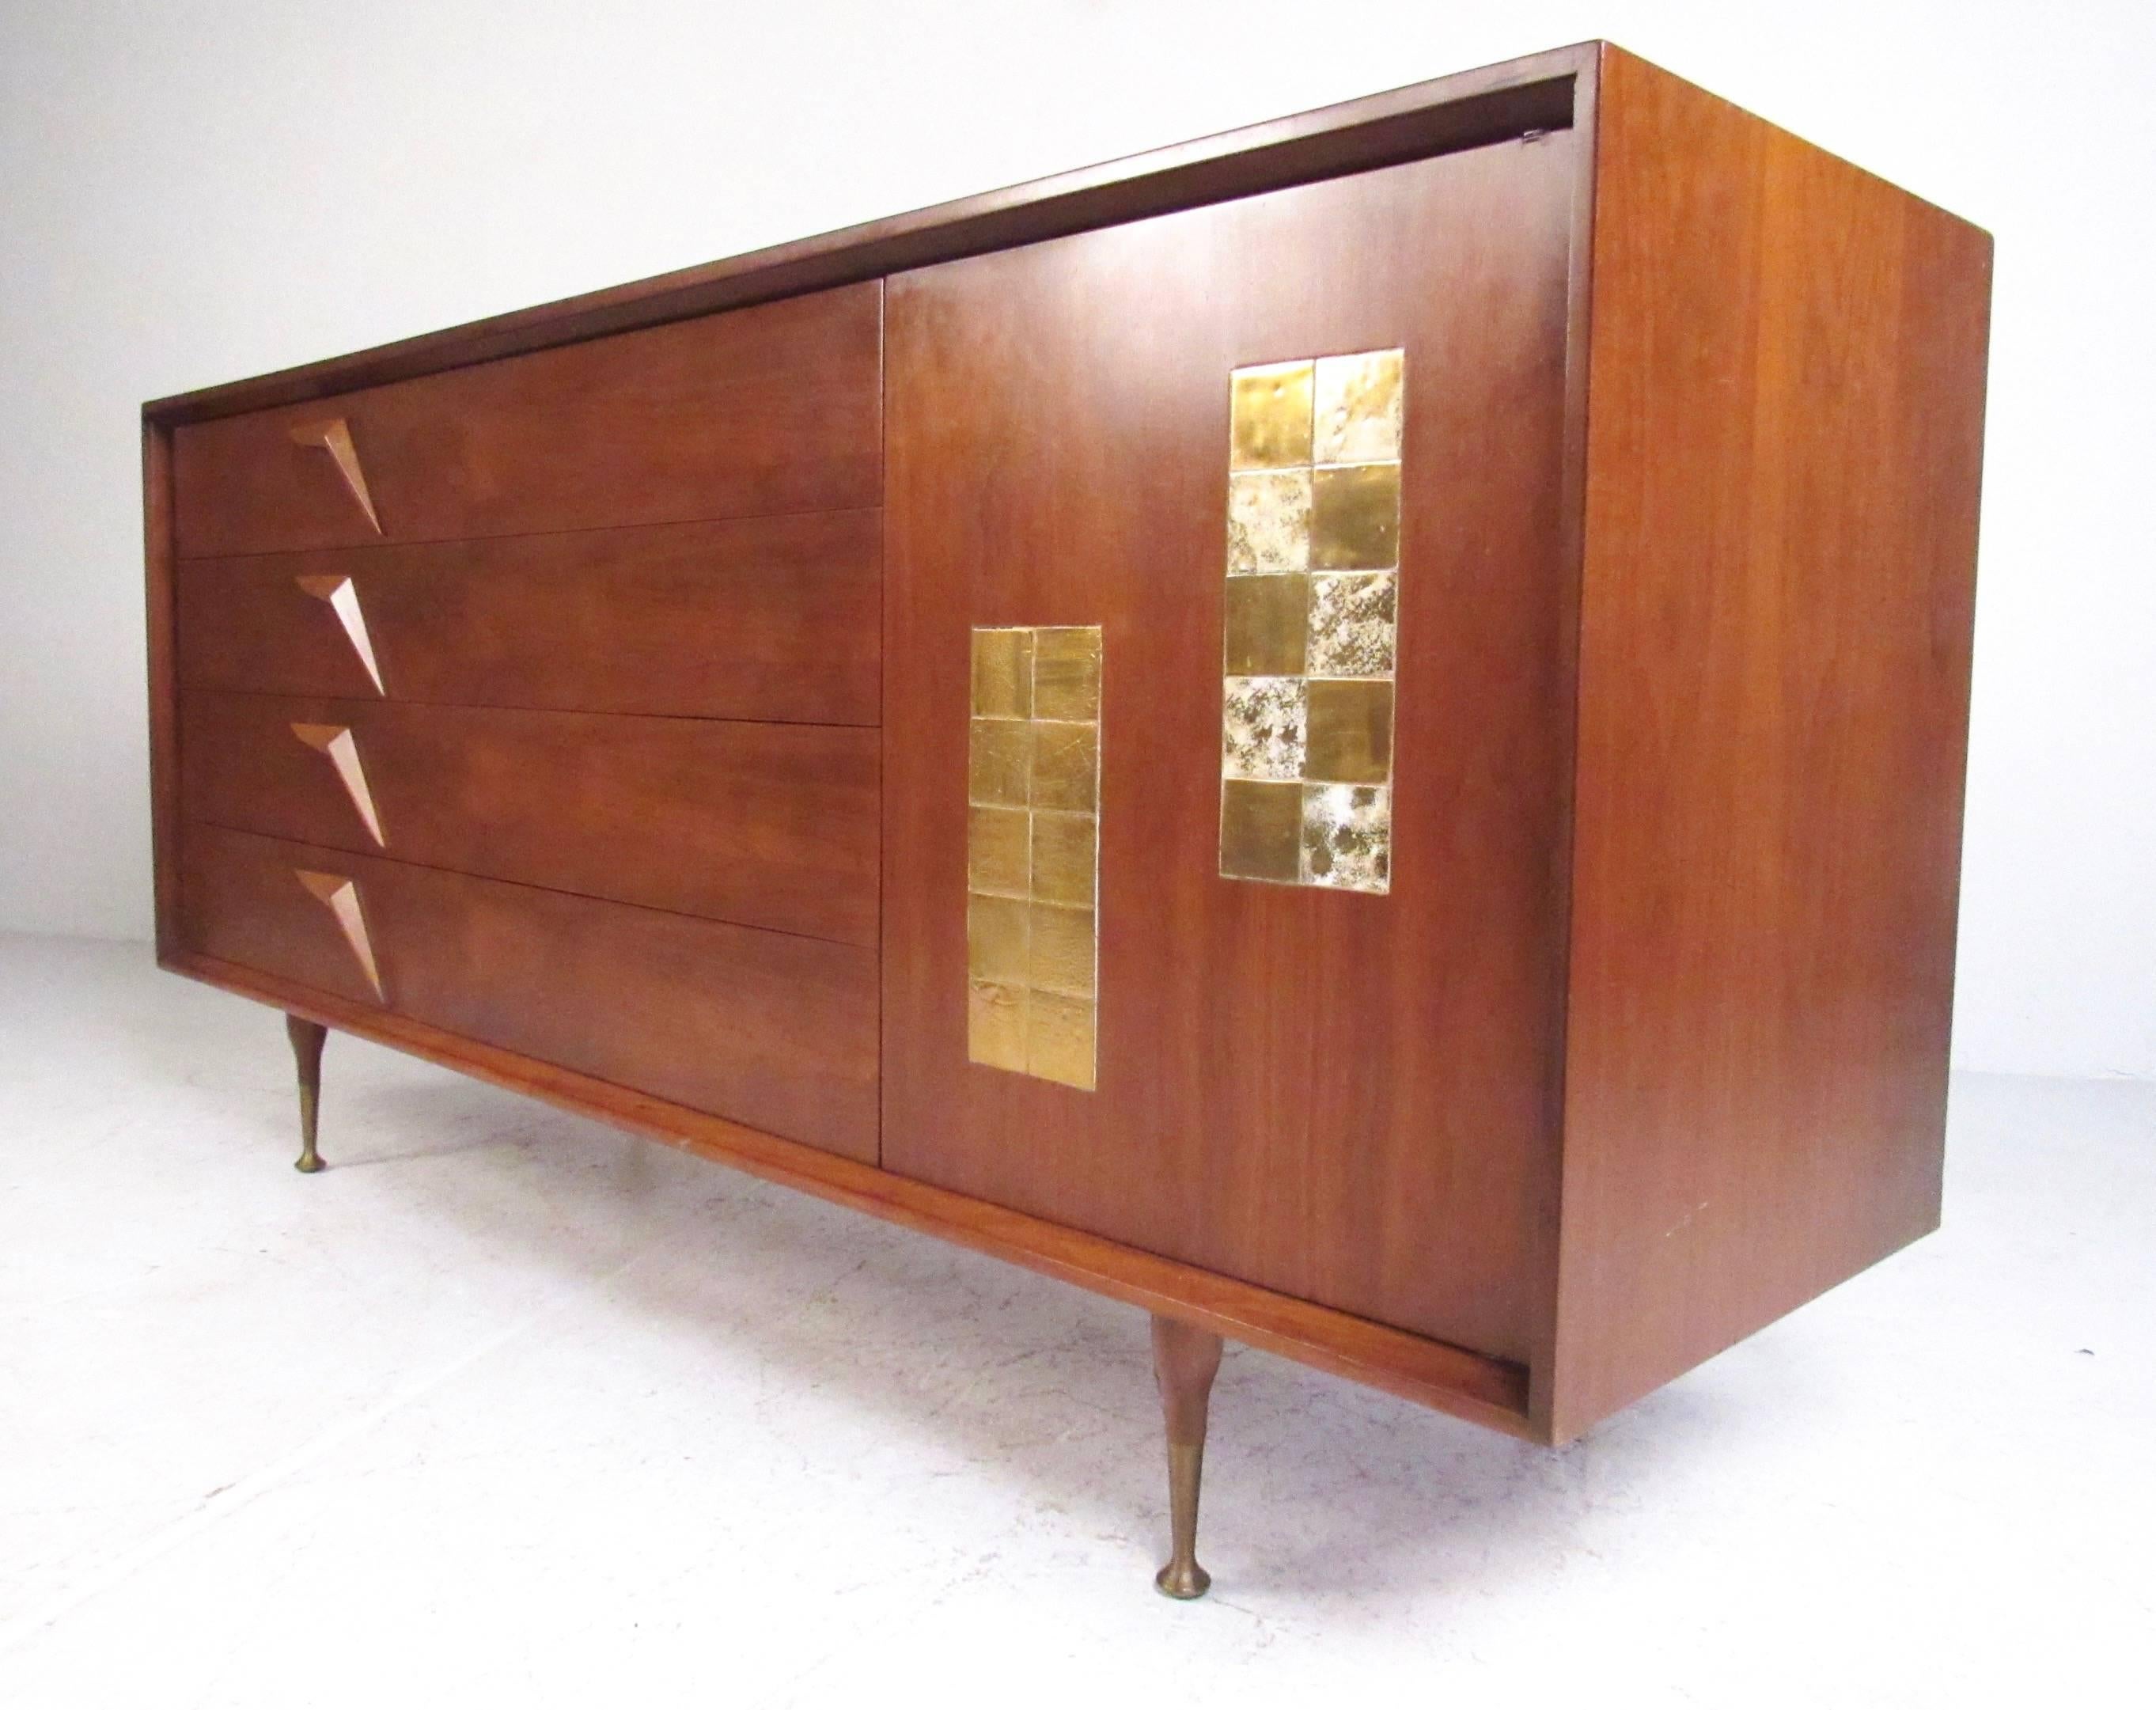 This unique 1950s bedroom dresser features all the design details of a high quality mid-century American piece. Stunning sculpted walnut drawer pulls, unique inlaid tile motif, tapered legs with quality brass sabots, along with metal drawer glides